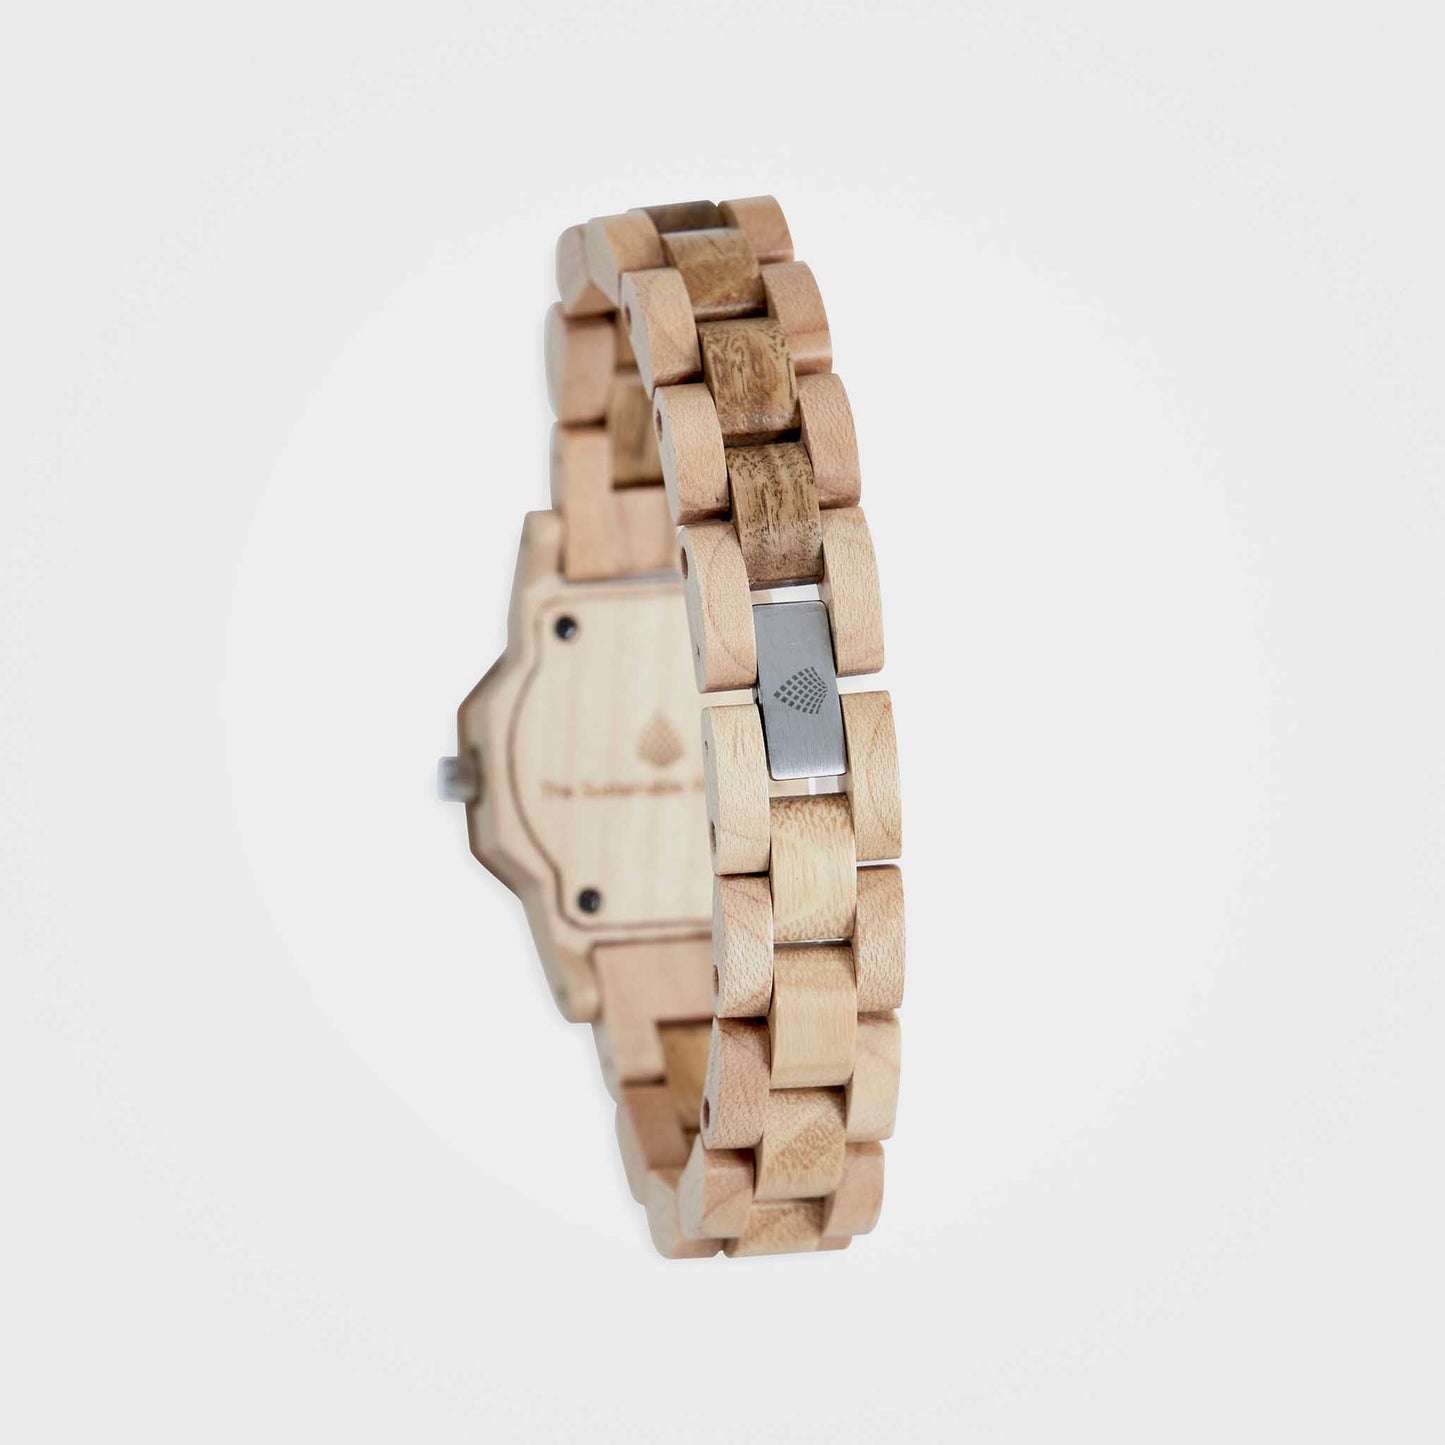 Eco-Friendly Handmade Wristwatch For Women: The Willow